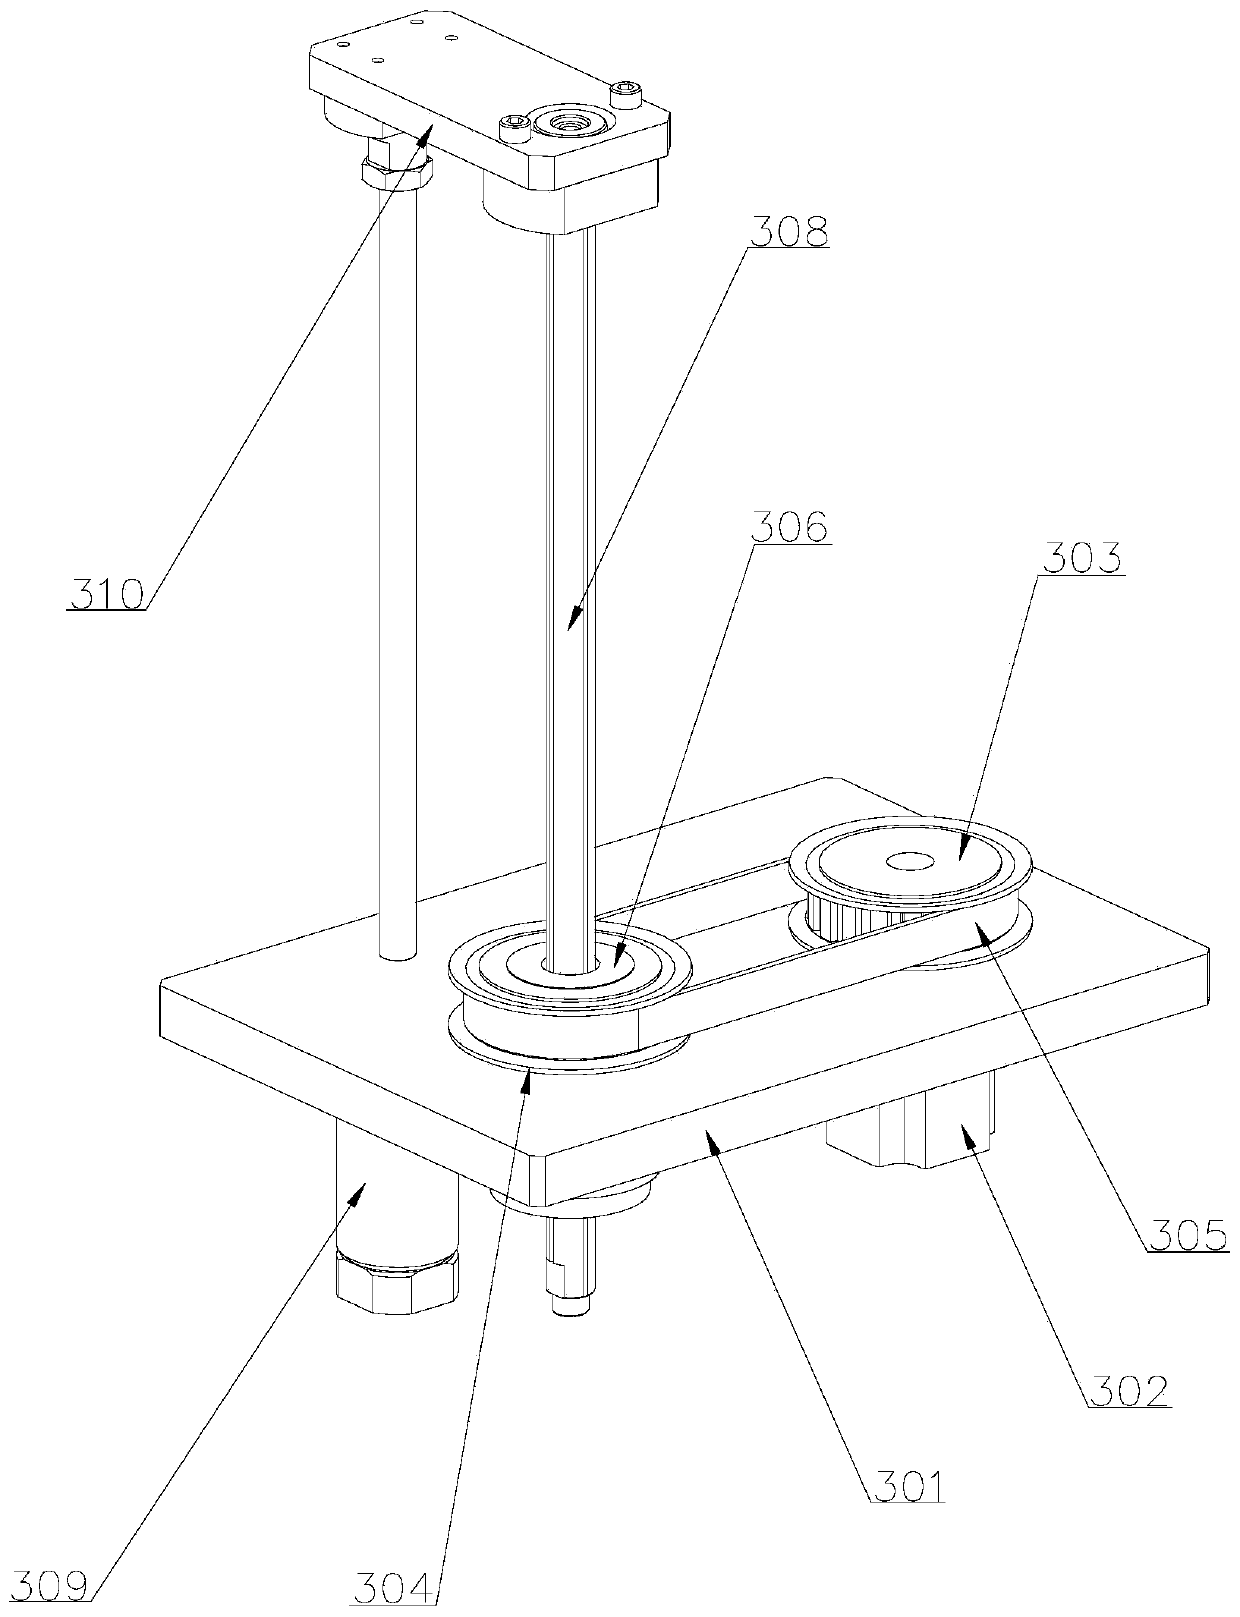 Stacking device for power equipment